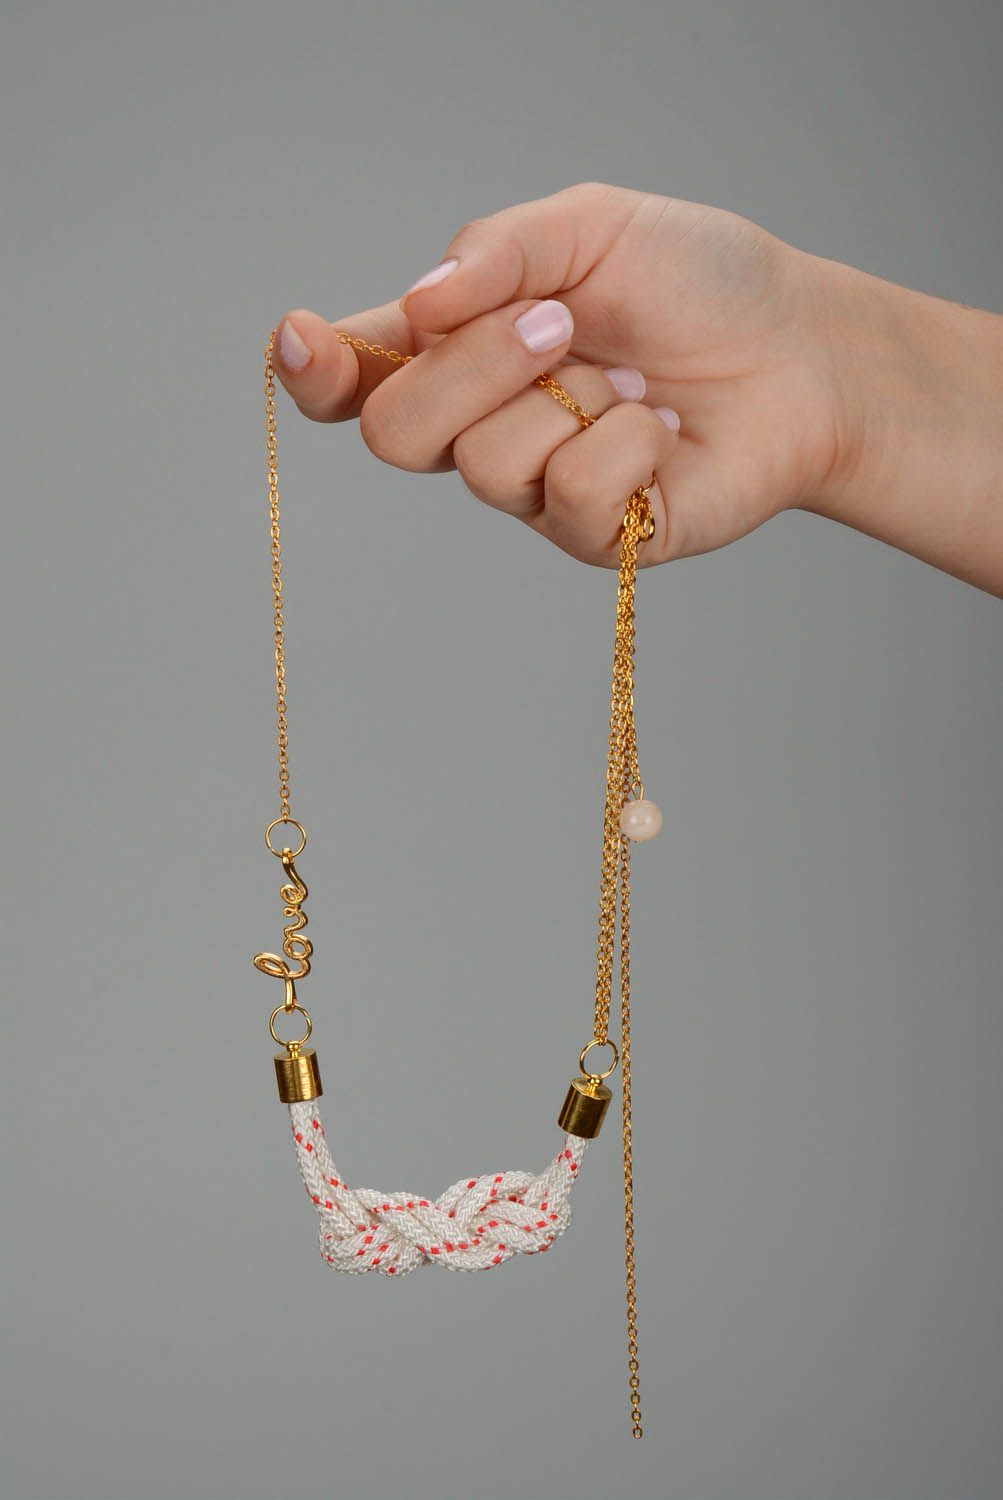 Necklace made of string Love photo 5